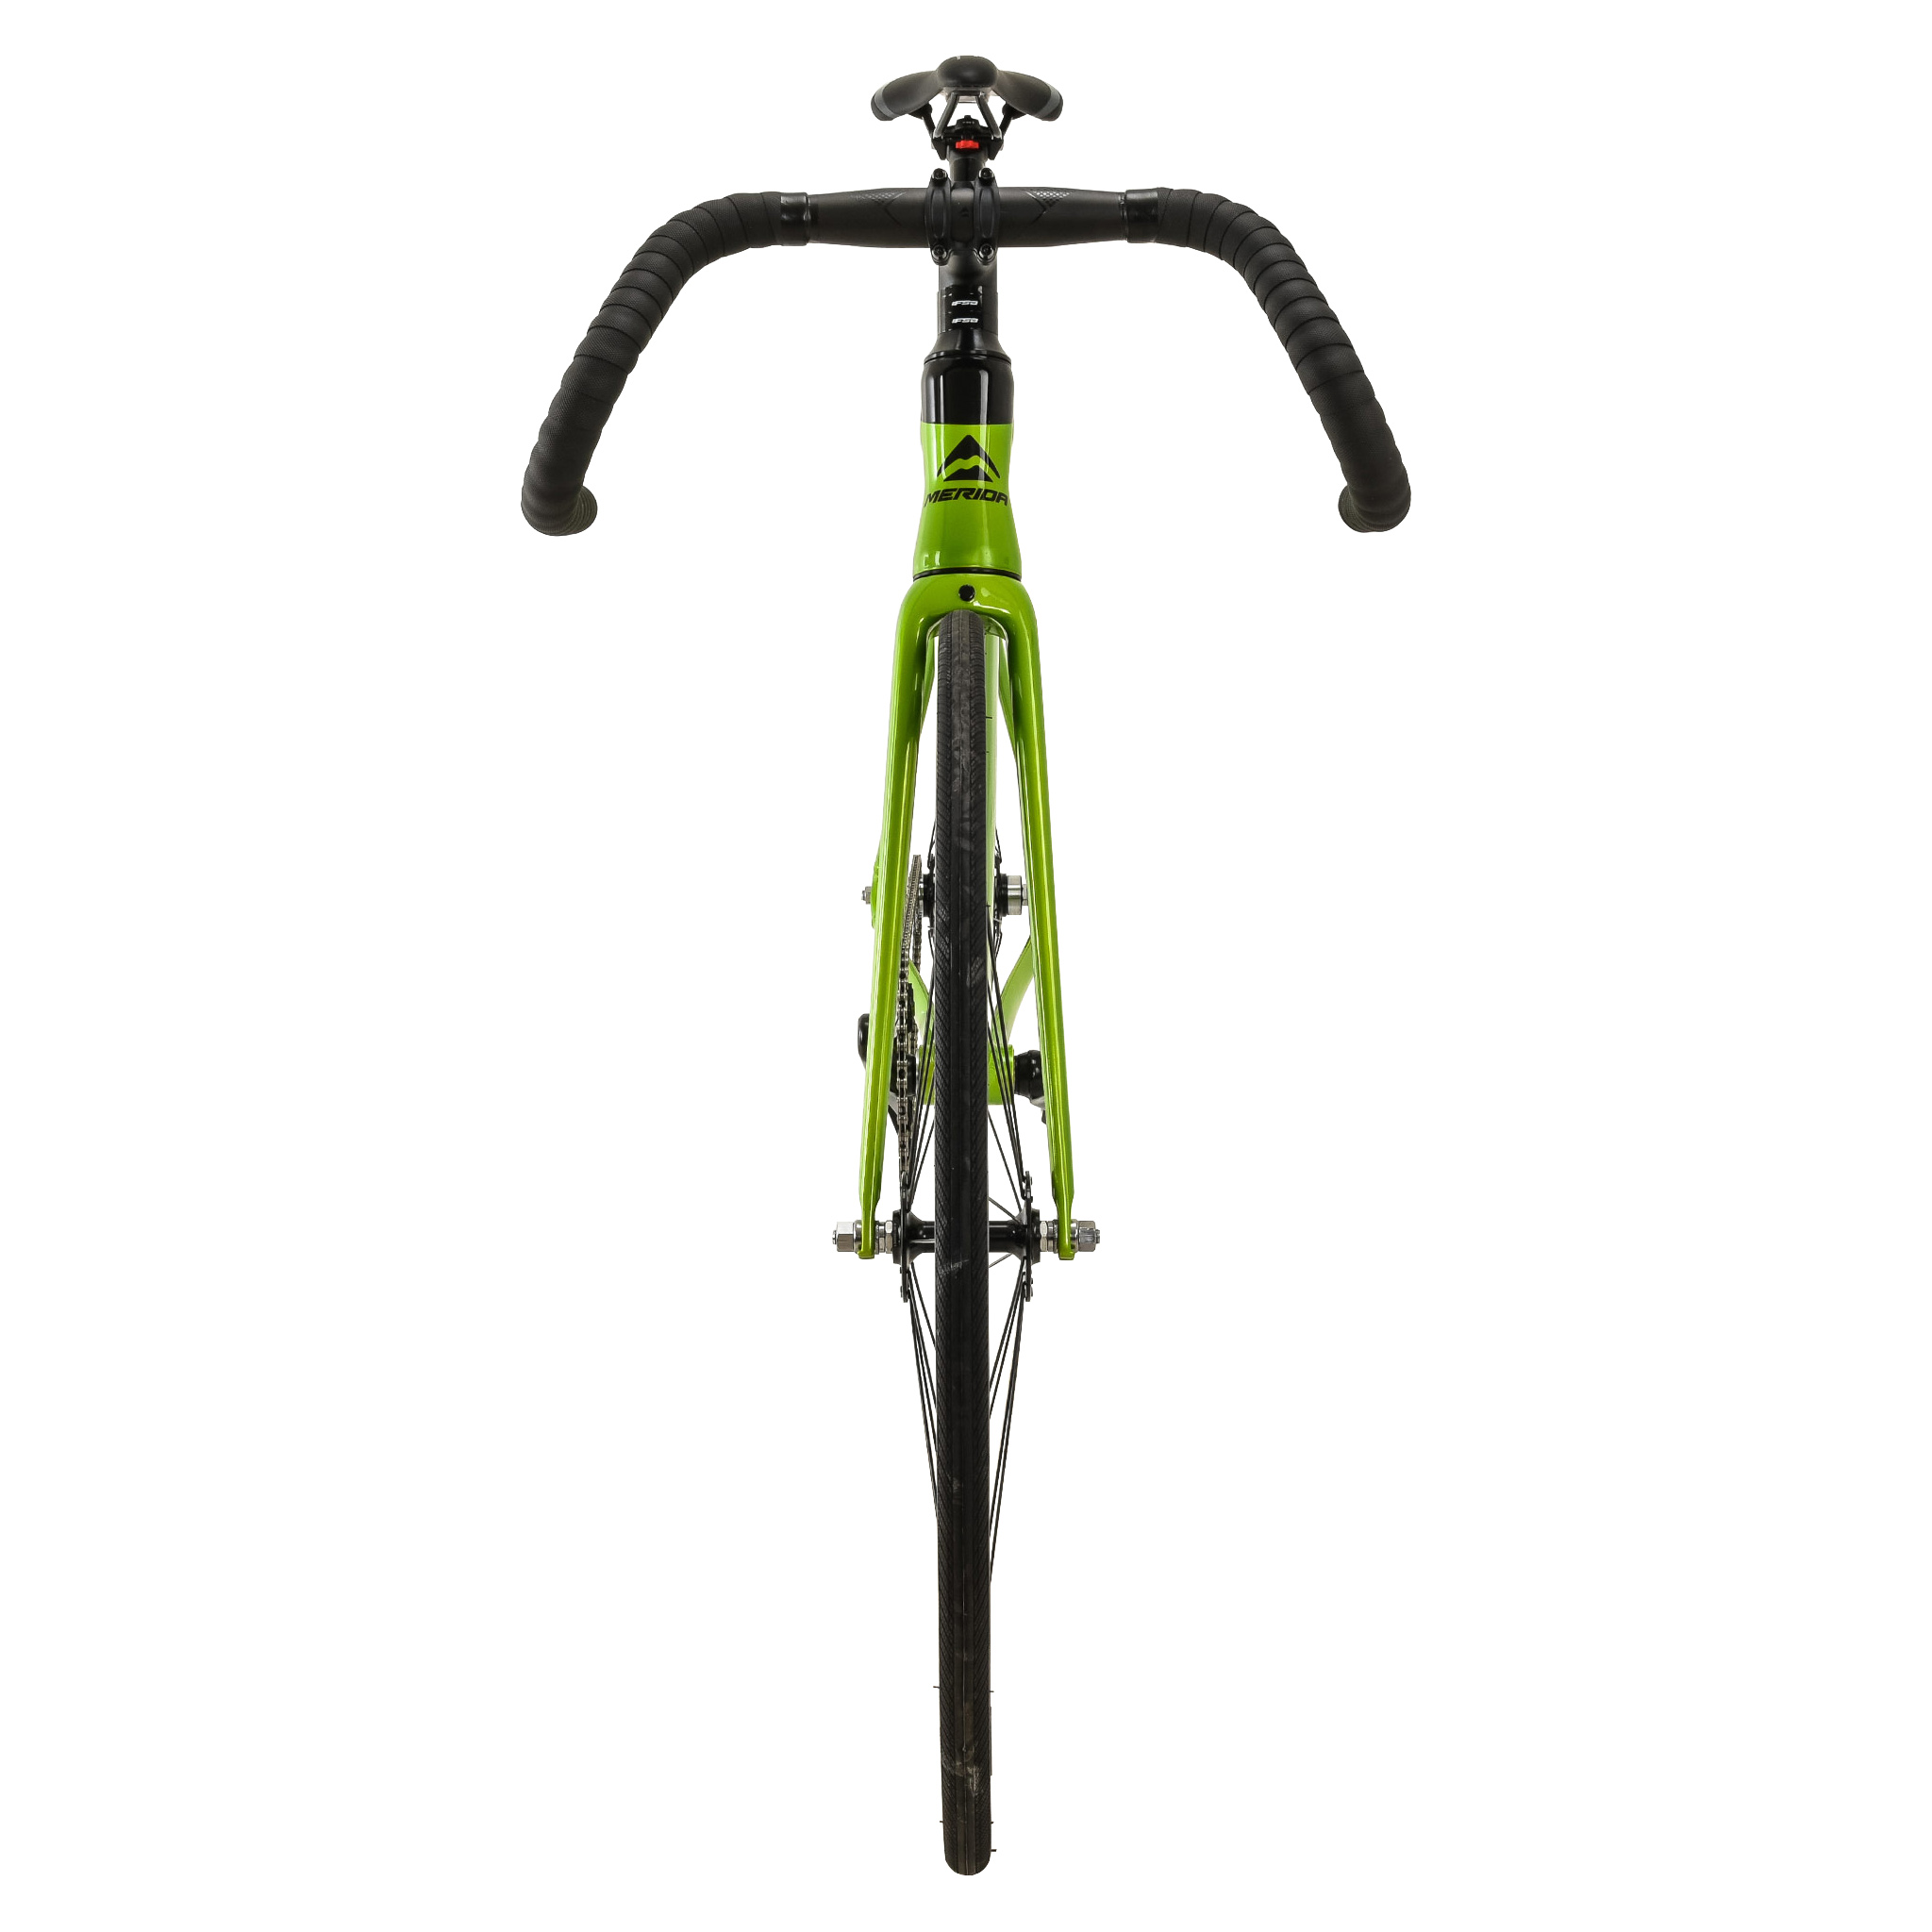 https://assets.probikeshop.fr/images/products2/658/155189/155189_15427180336853.jpg